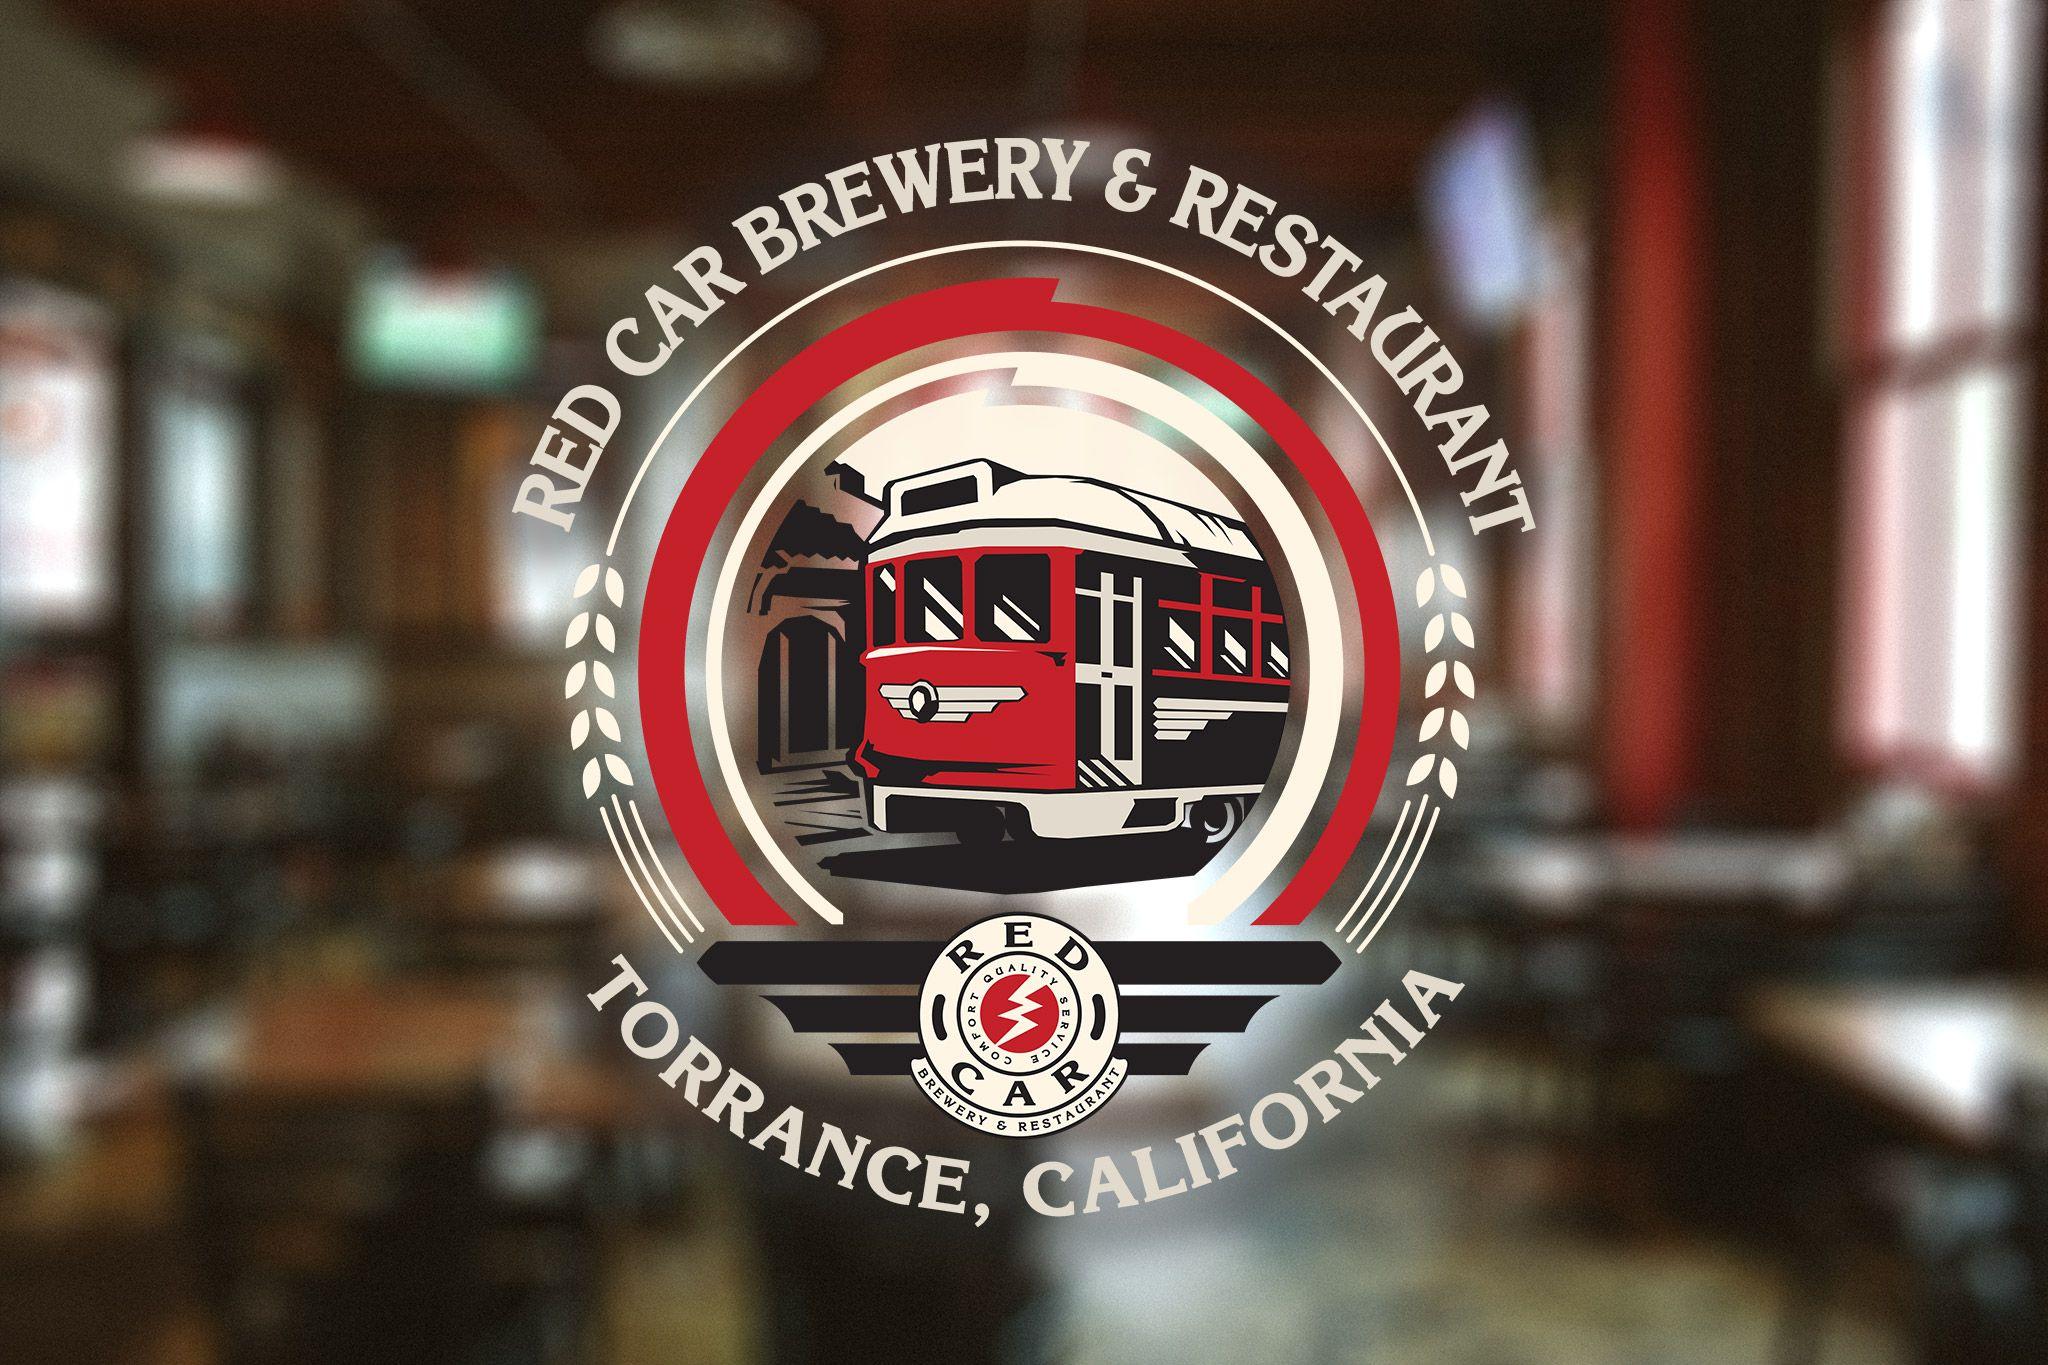 Reds Beer Logo - Red Car Brewery & Restaurant. Torrance, South Bay